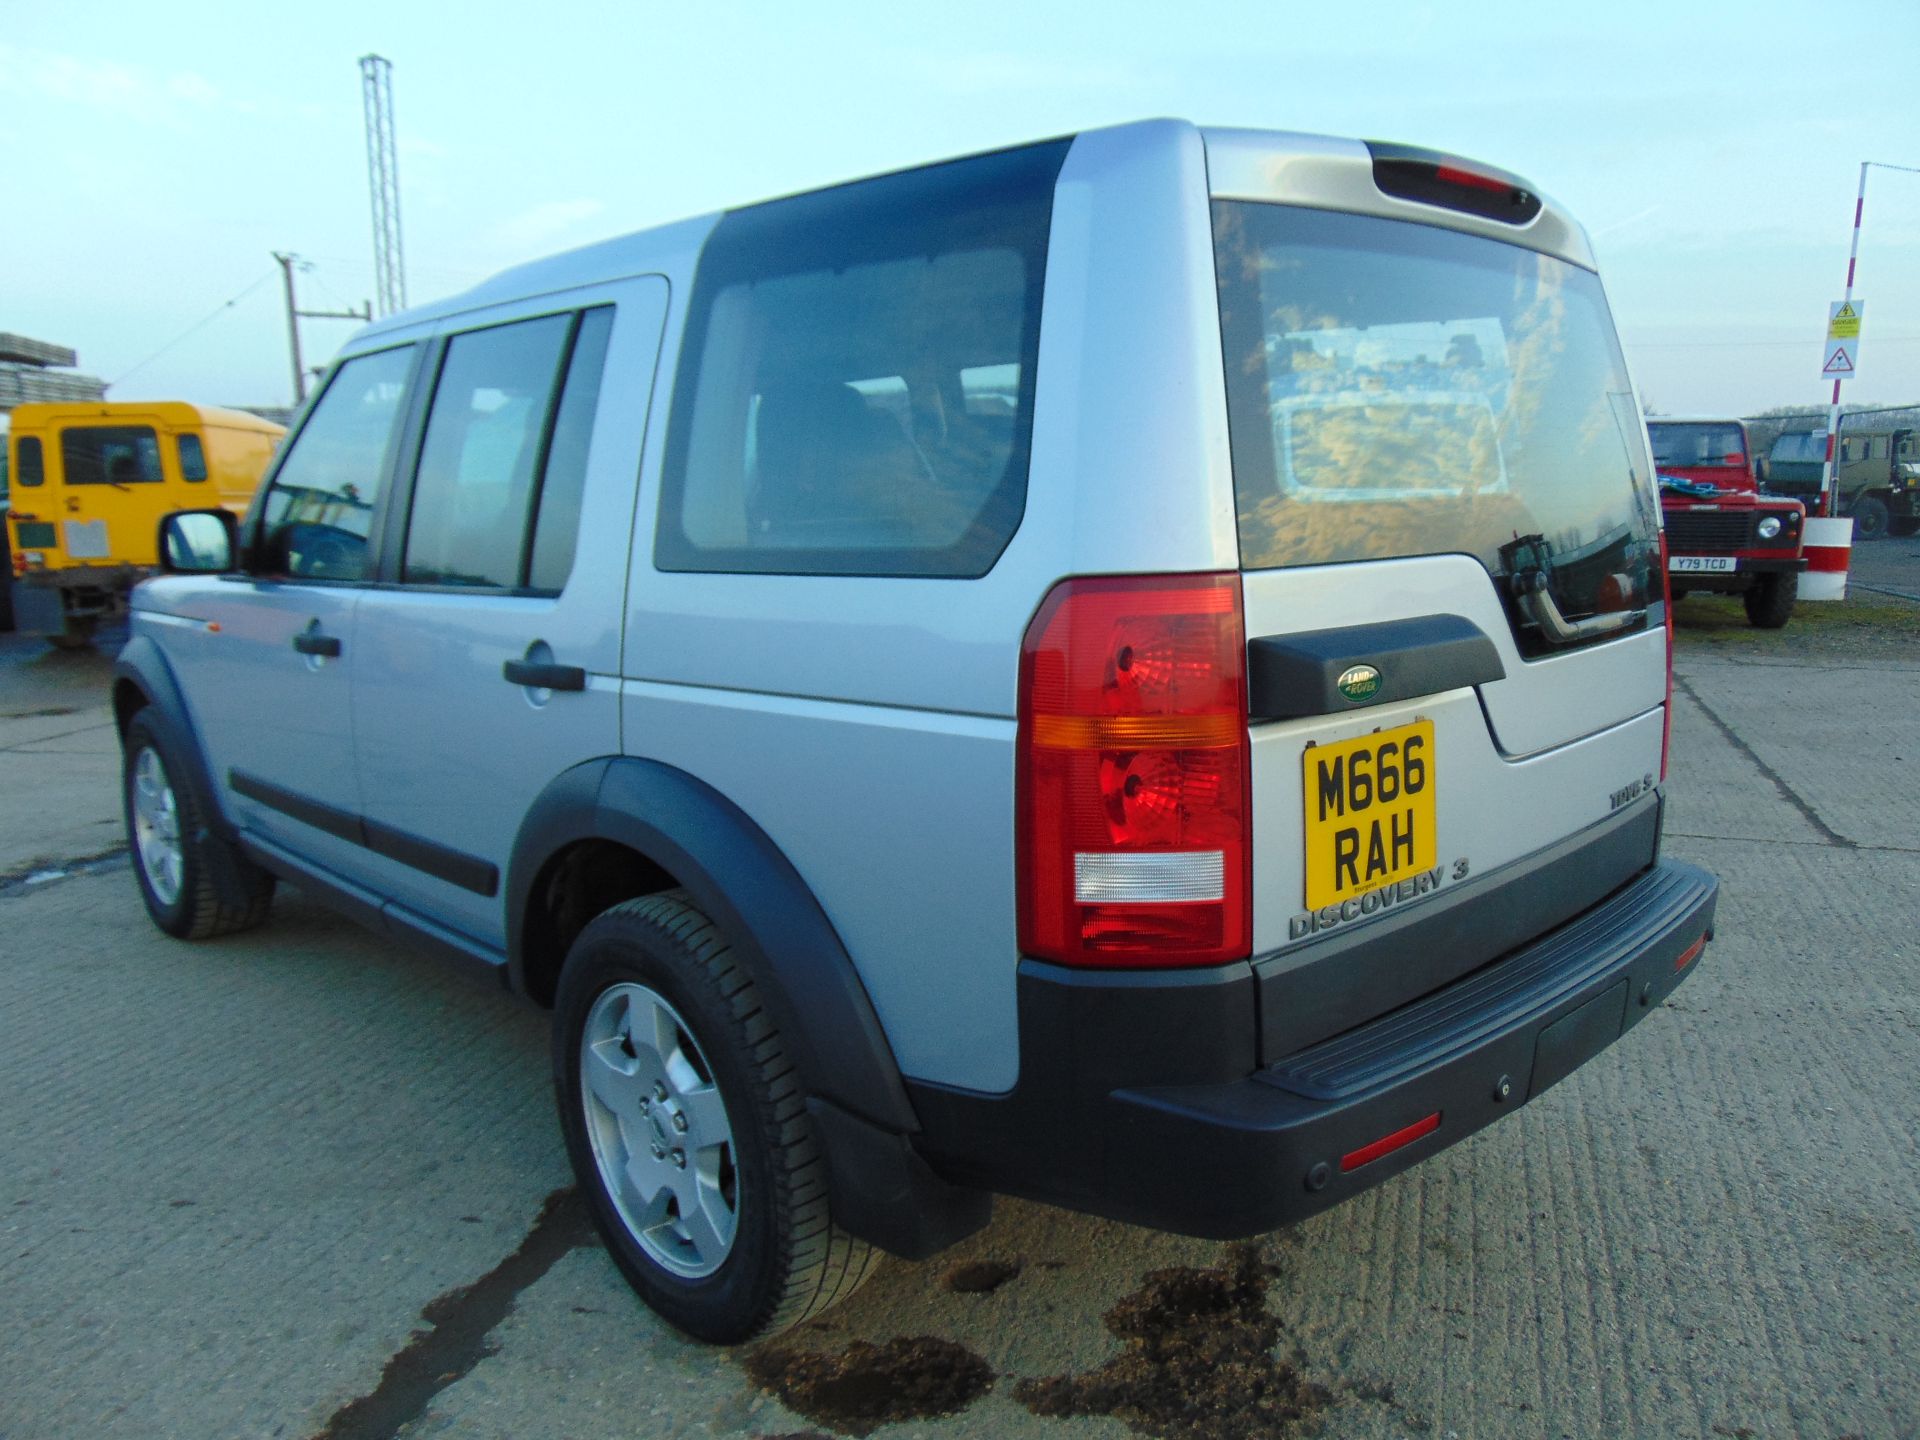 2006 Land Rover Discovery 3 2.7 TDV6 S Auto - Image 9 of 21